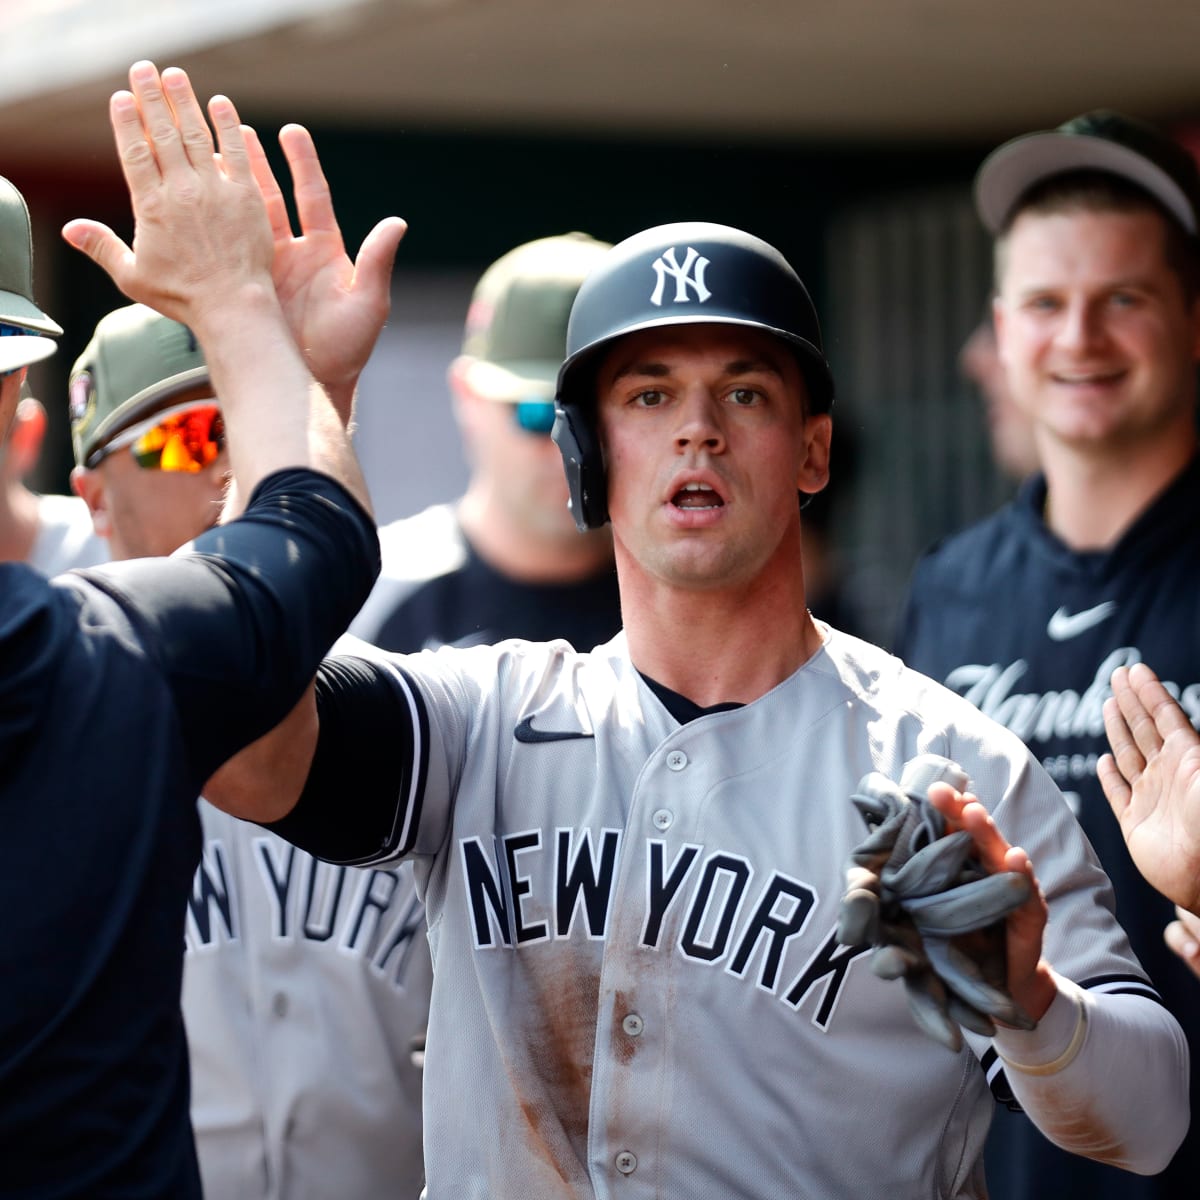 Catcher Ben Rortvedt Collects Two Hits in New York Yankees Debut